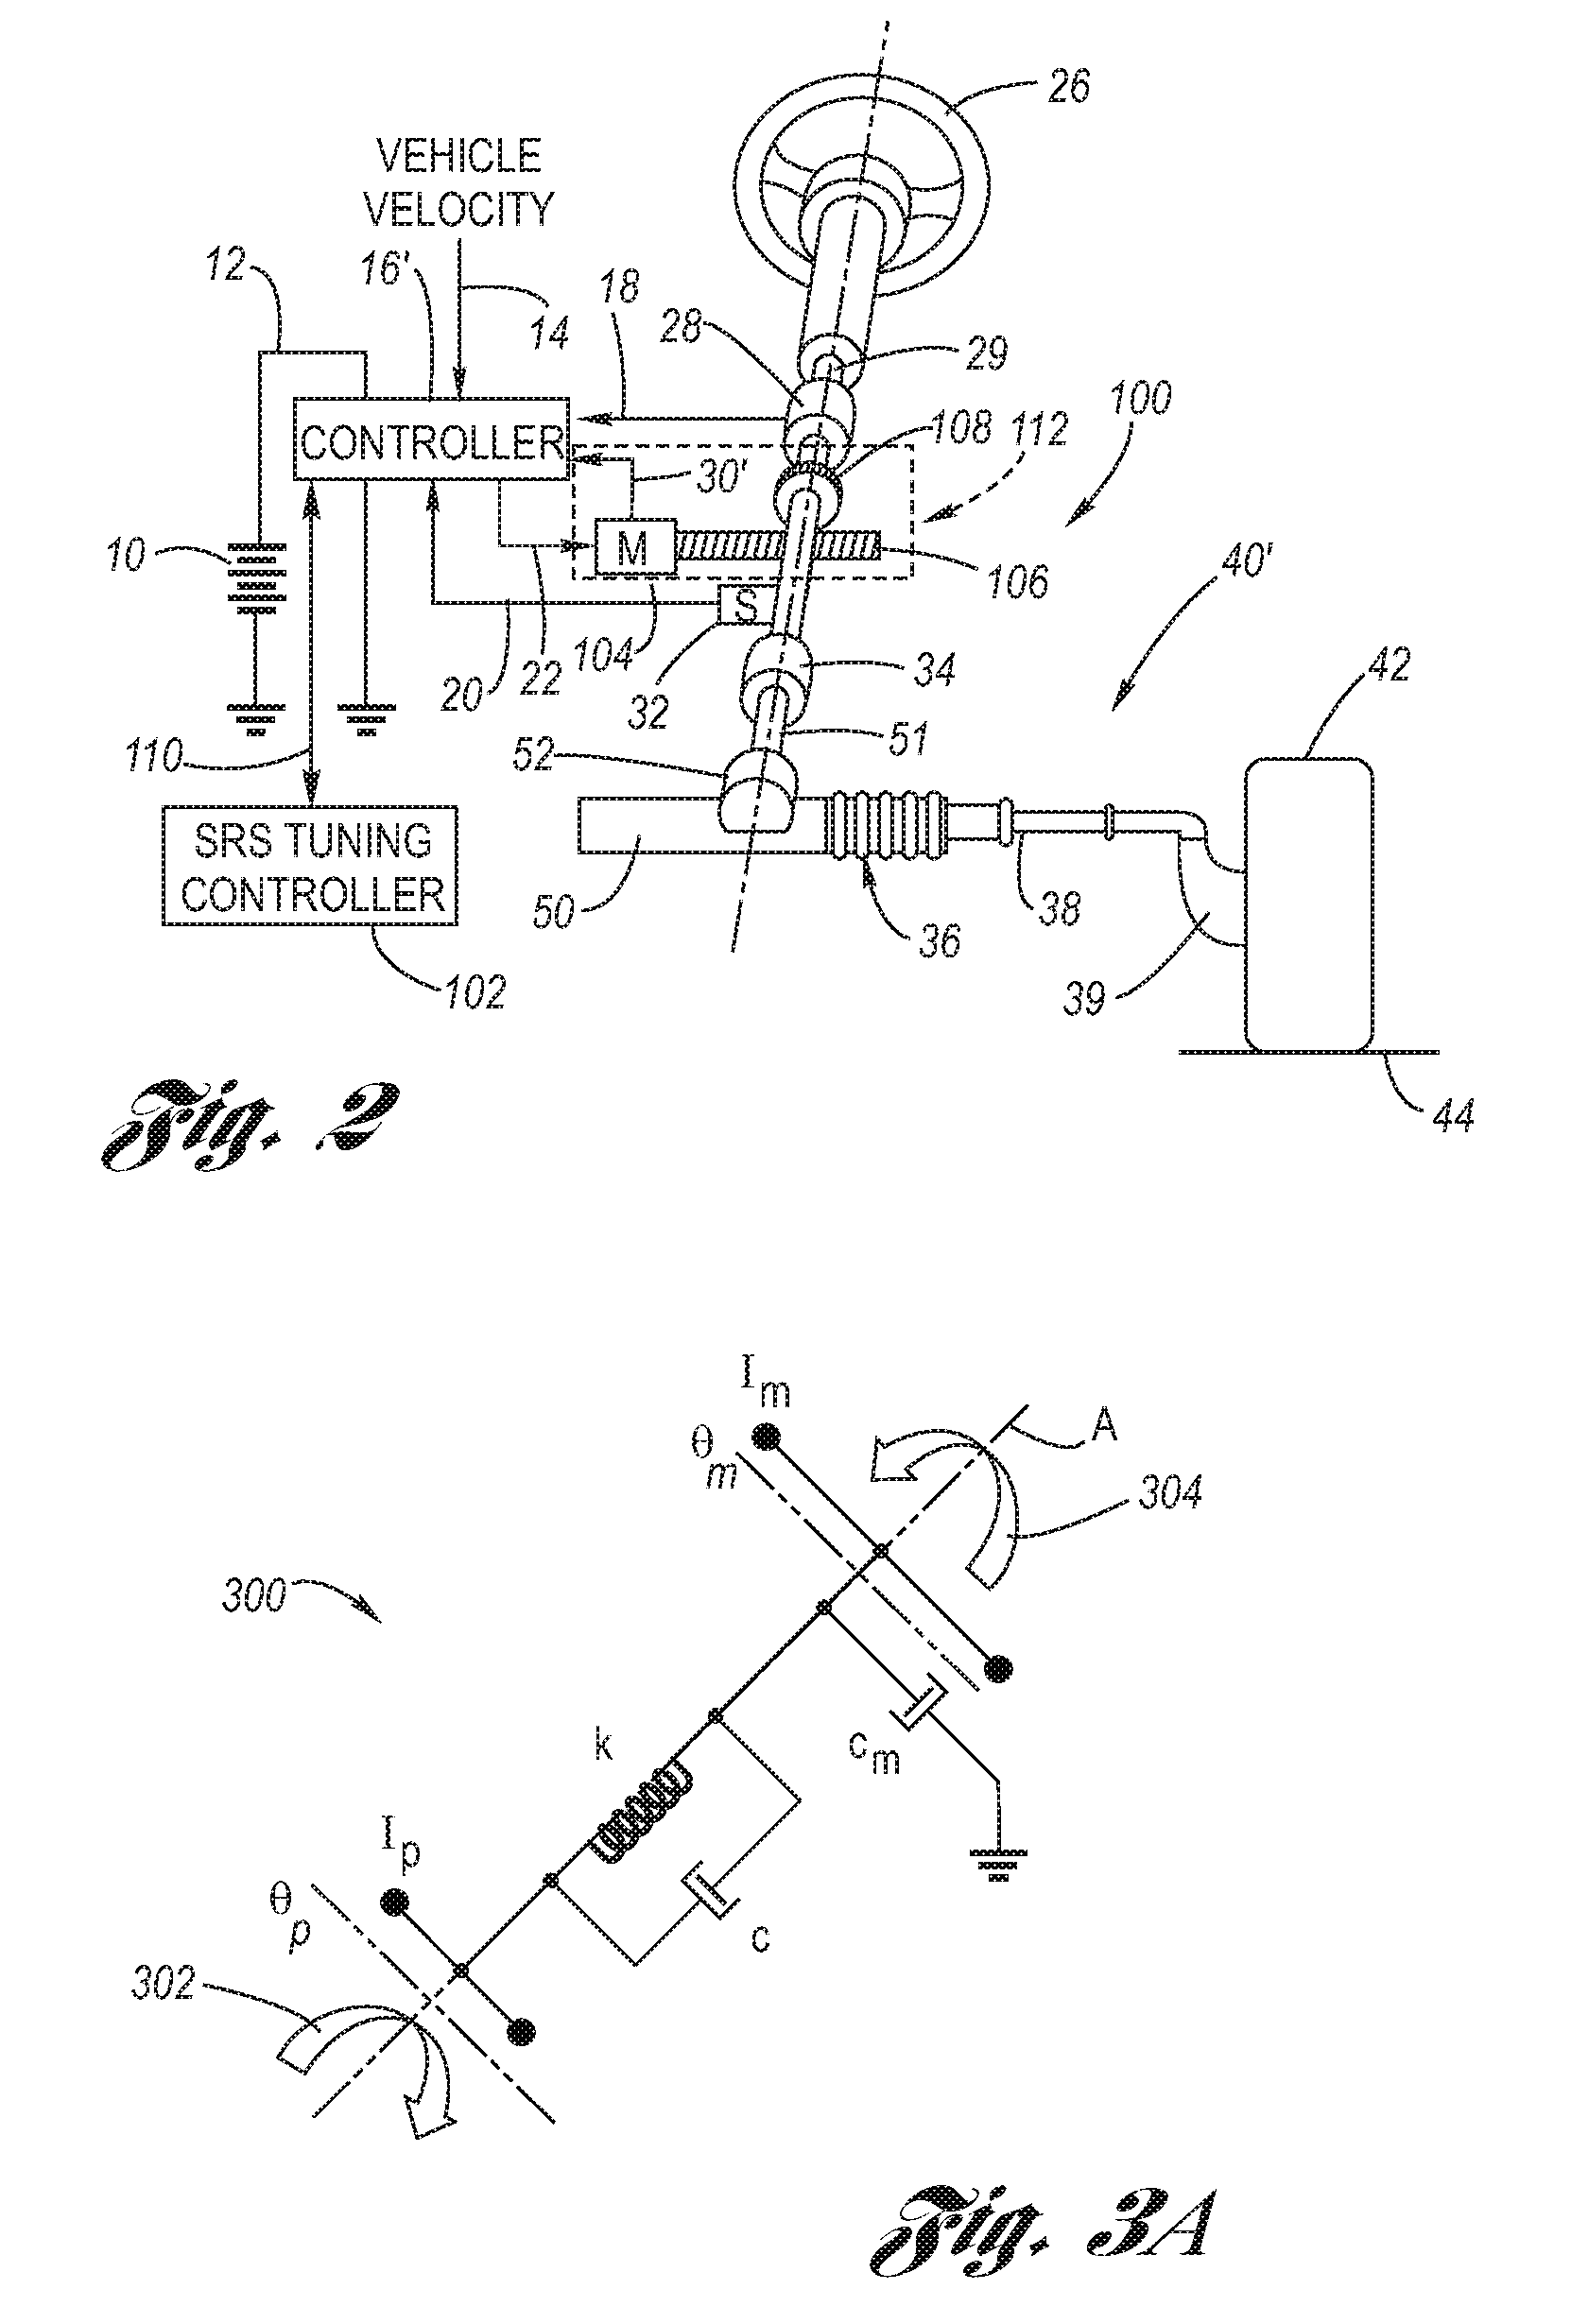 Method for attenuating smooth road shake in an electric power steering system